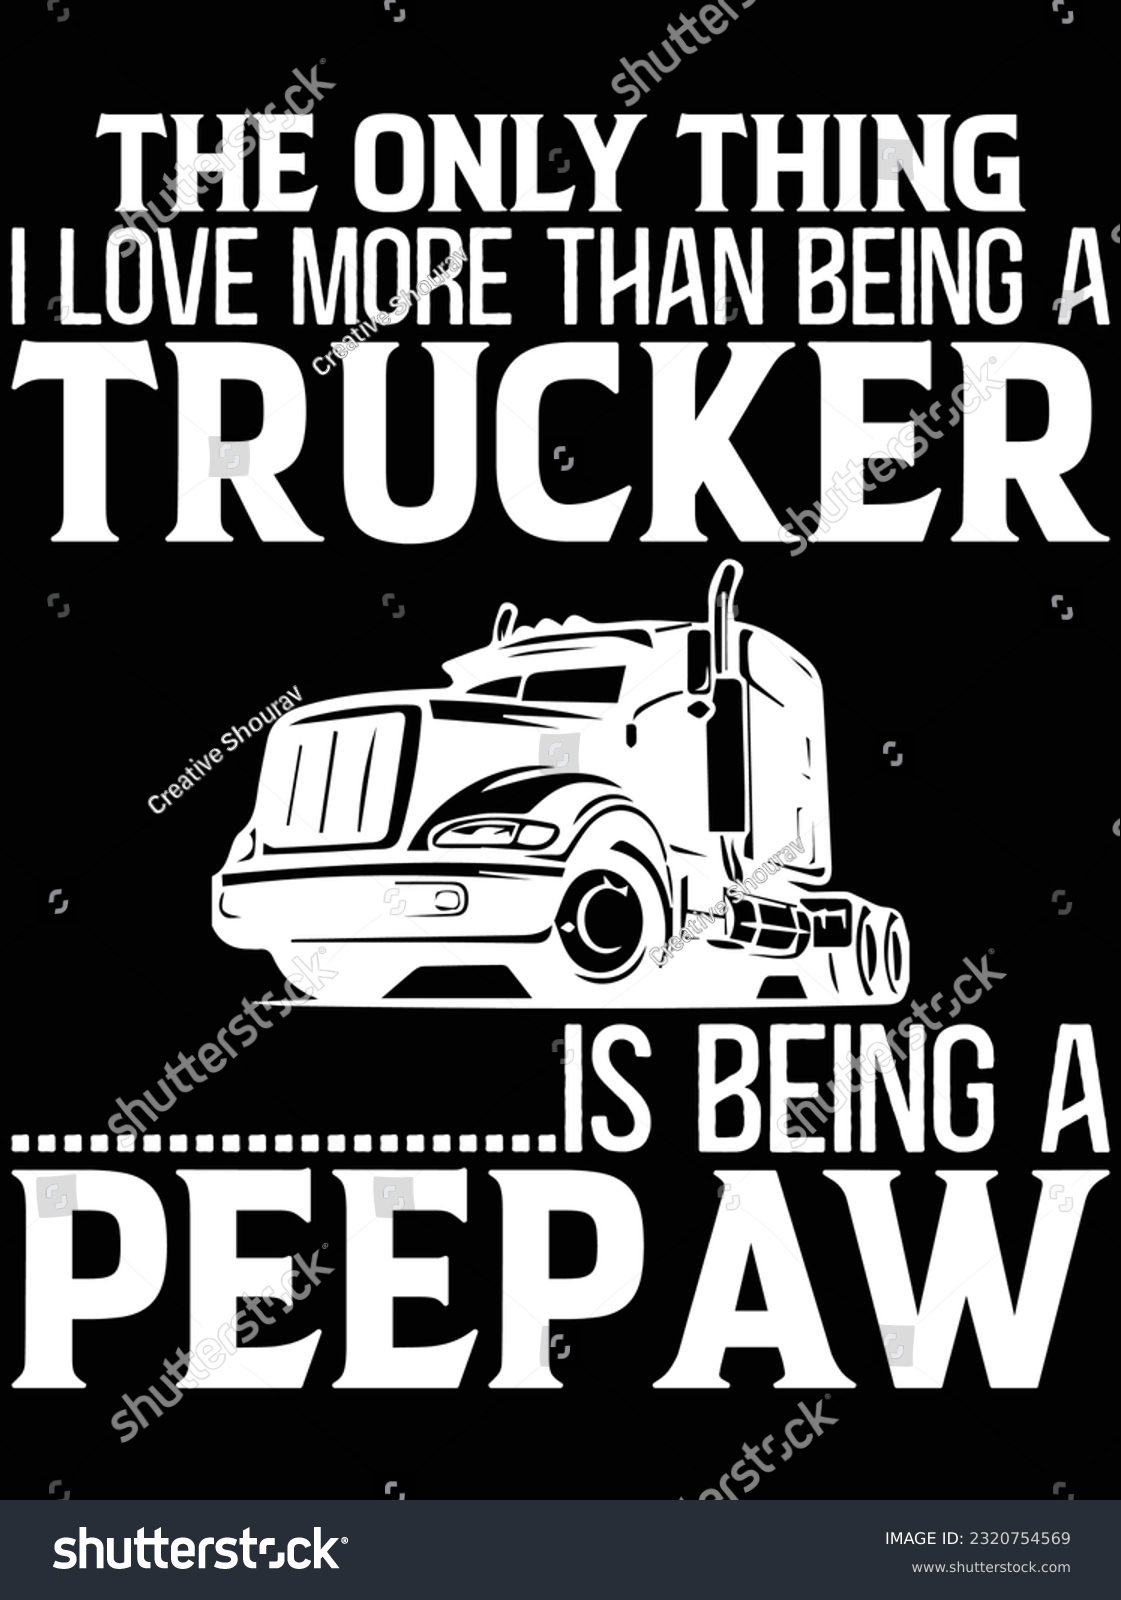 SVG of The only thing I love more than being a trucker vector art design, eps file. design file for t-shirt. SVG, EPS cuttable design file svg